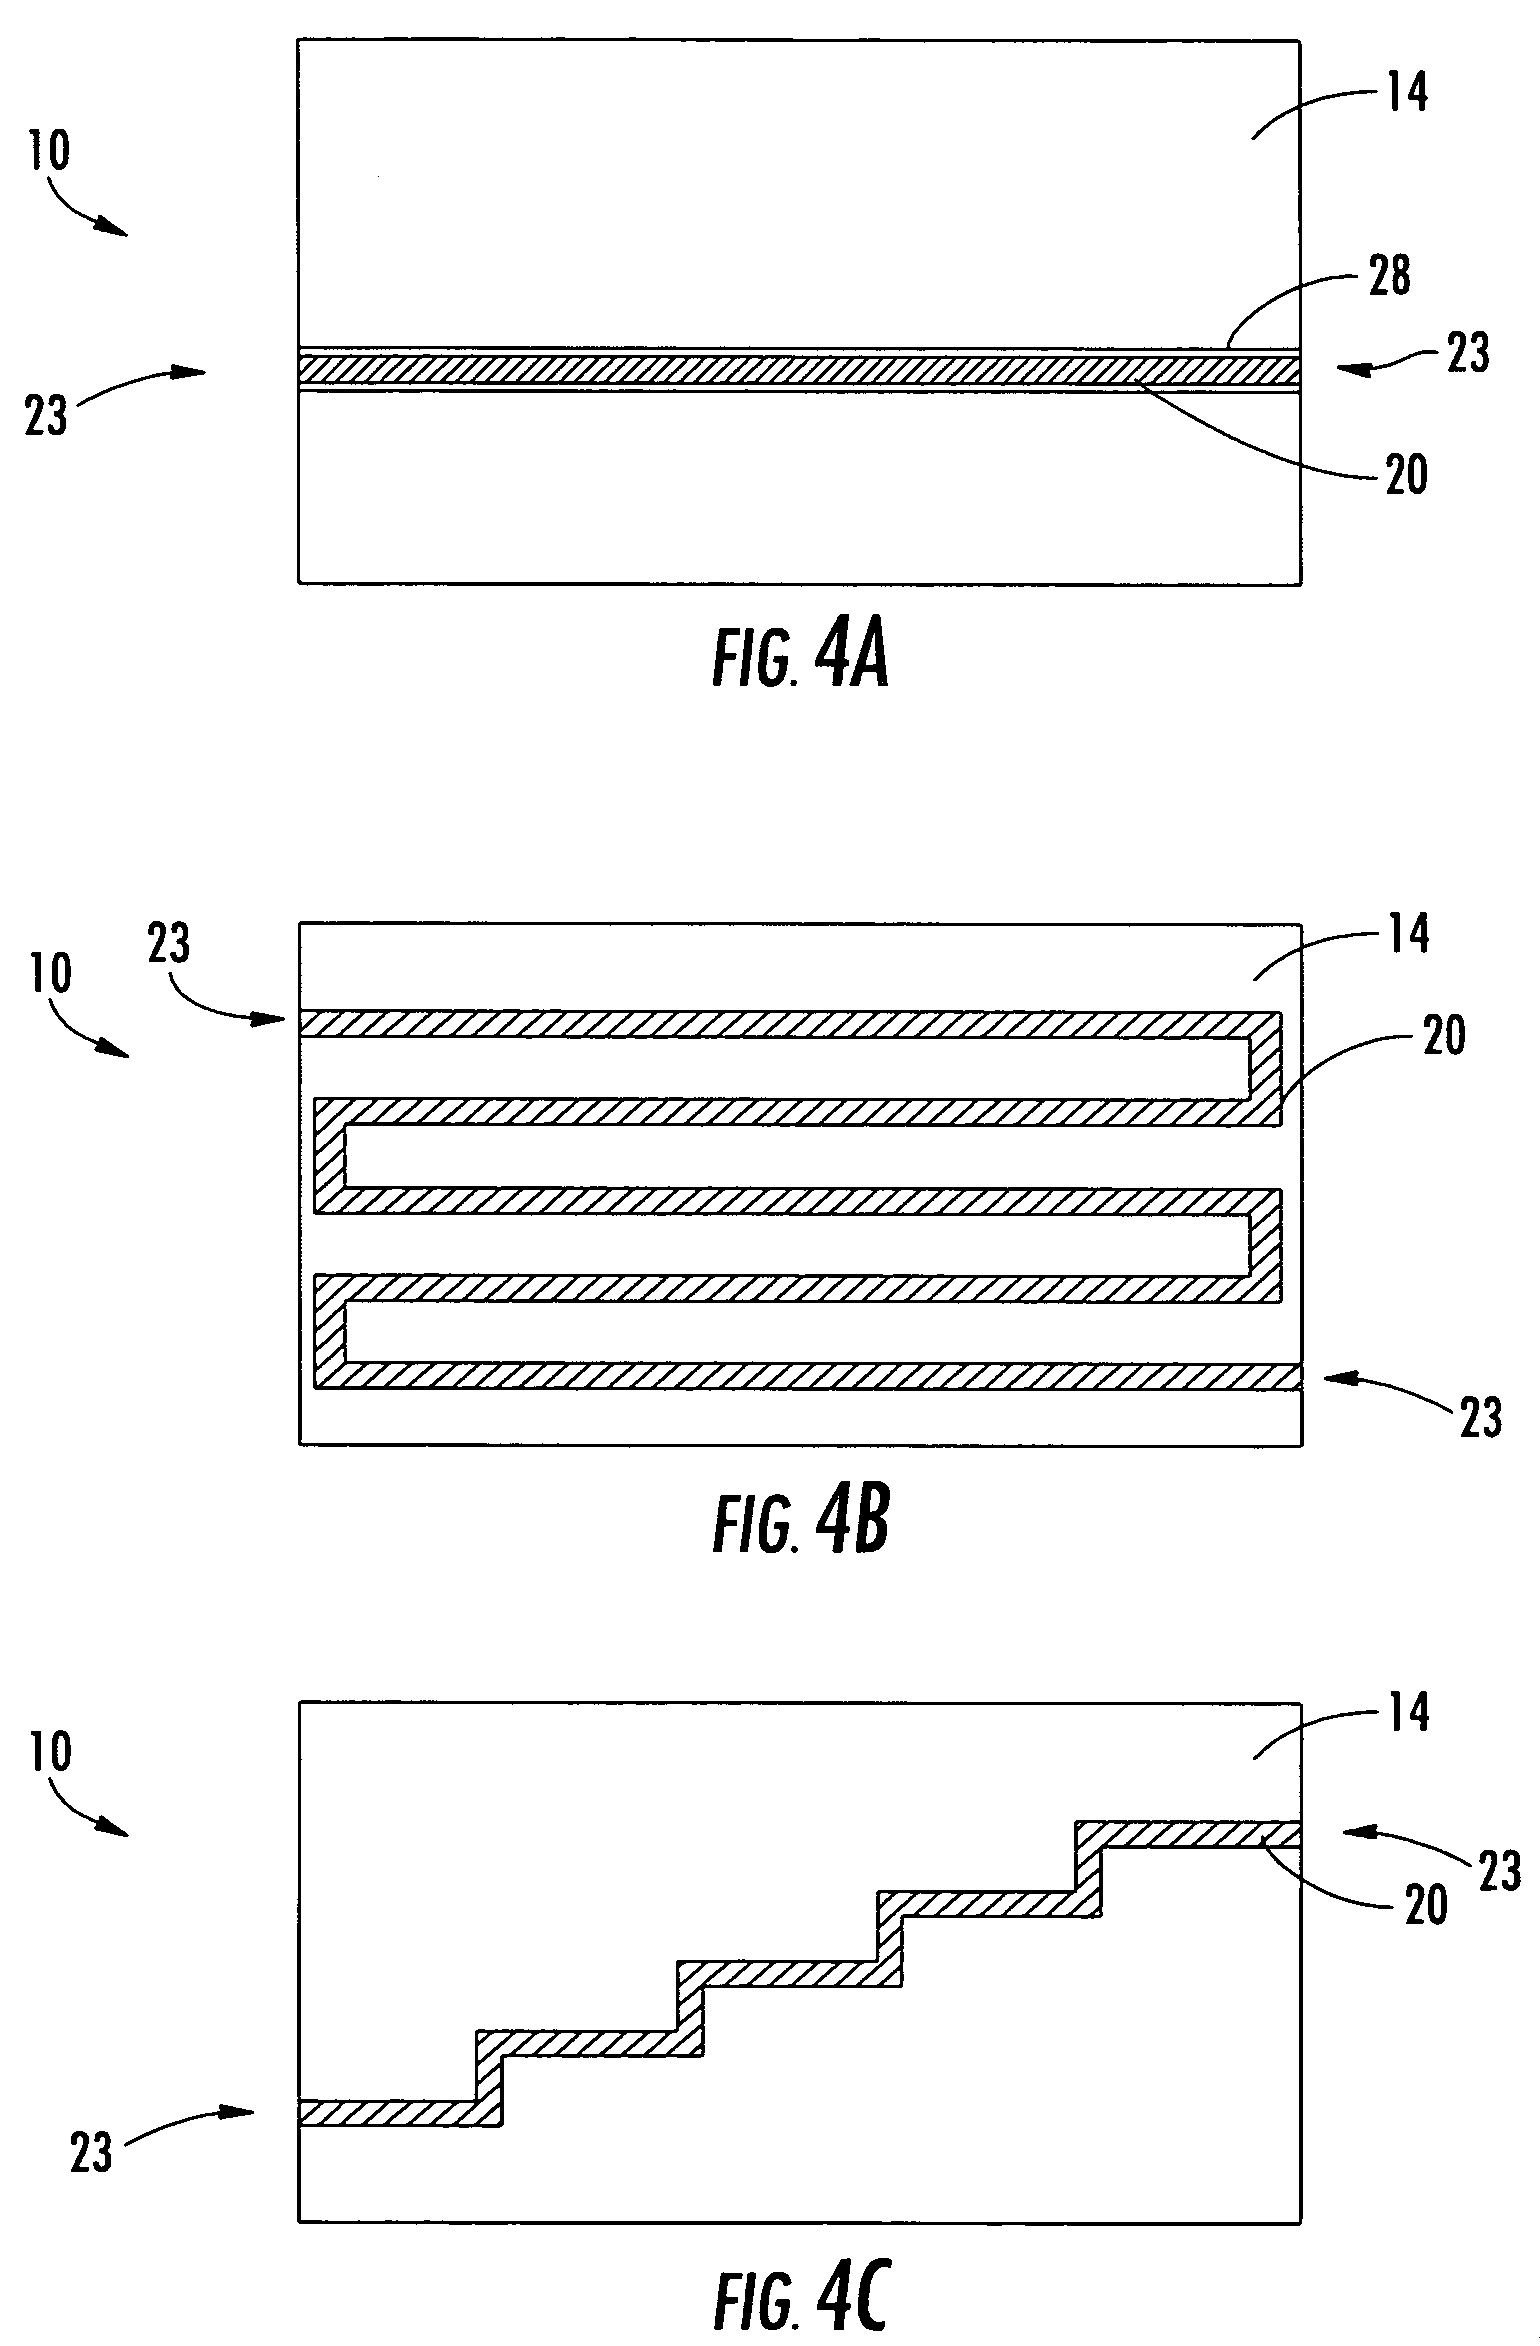 Wear monitoring system with embedded conductors